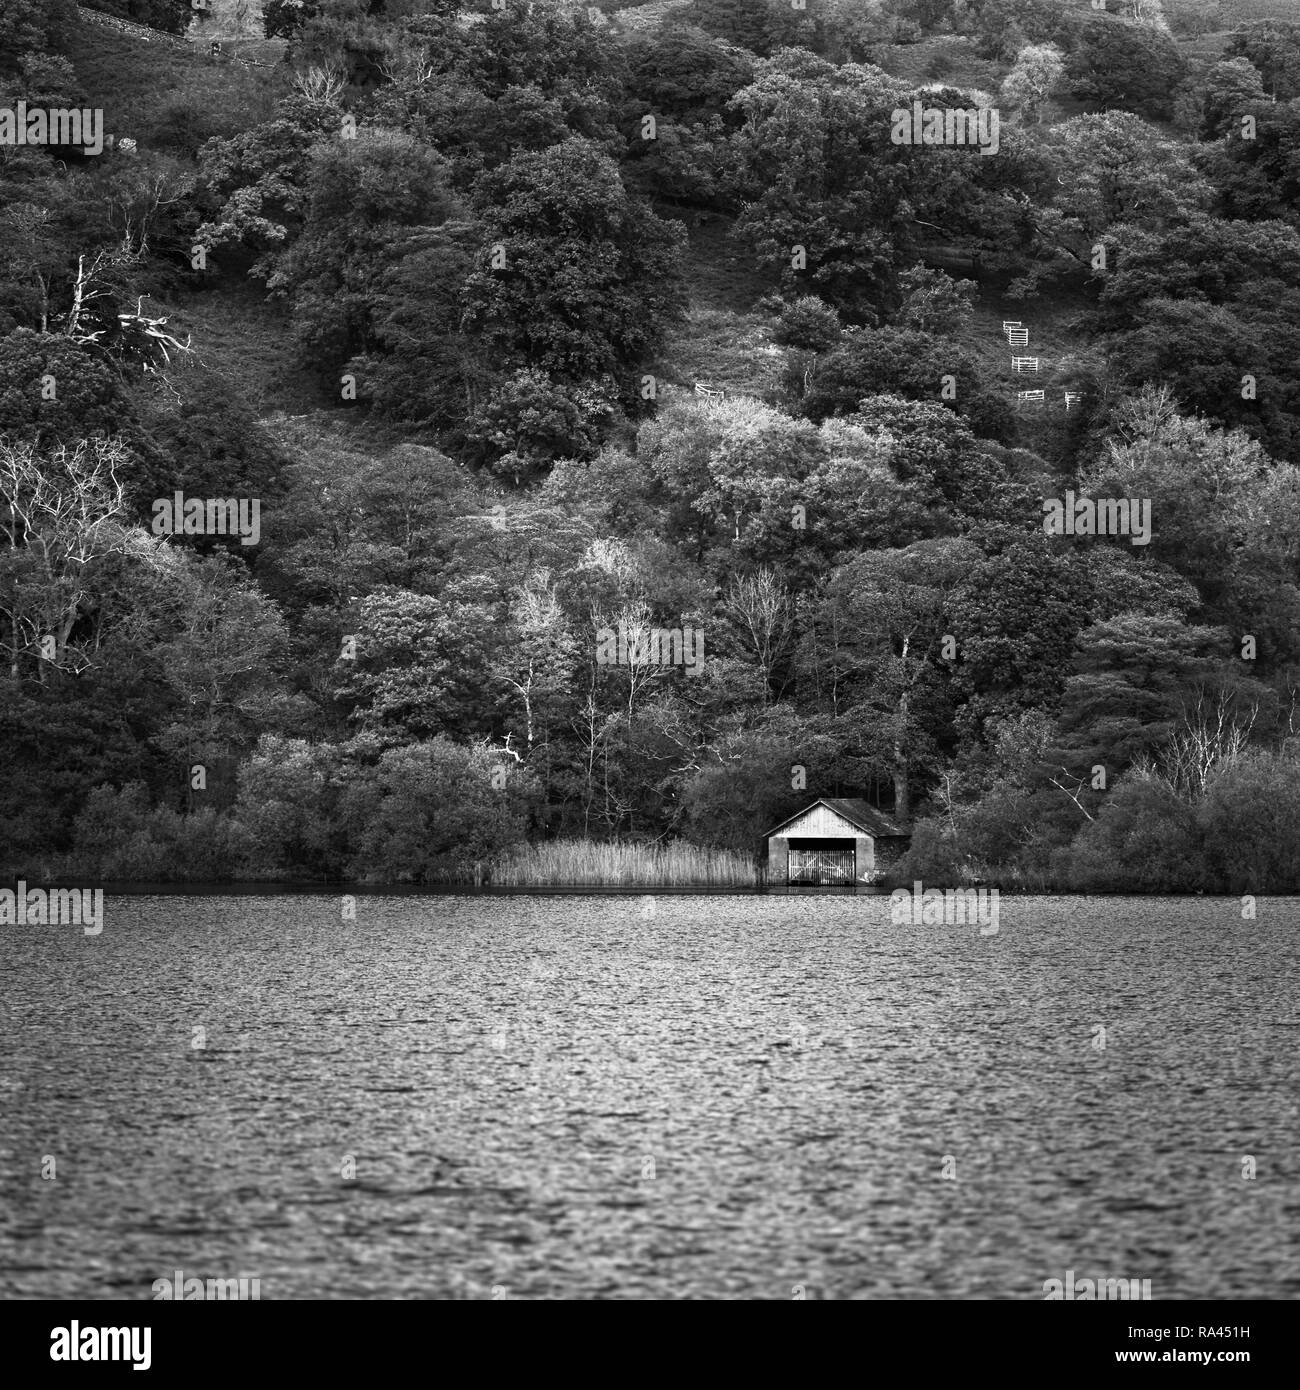 Looking across Rydal Water towards the old boathouse with the backdrop of trees on the hillside filling the frame Stock Photo